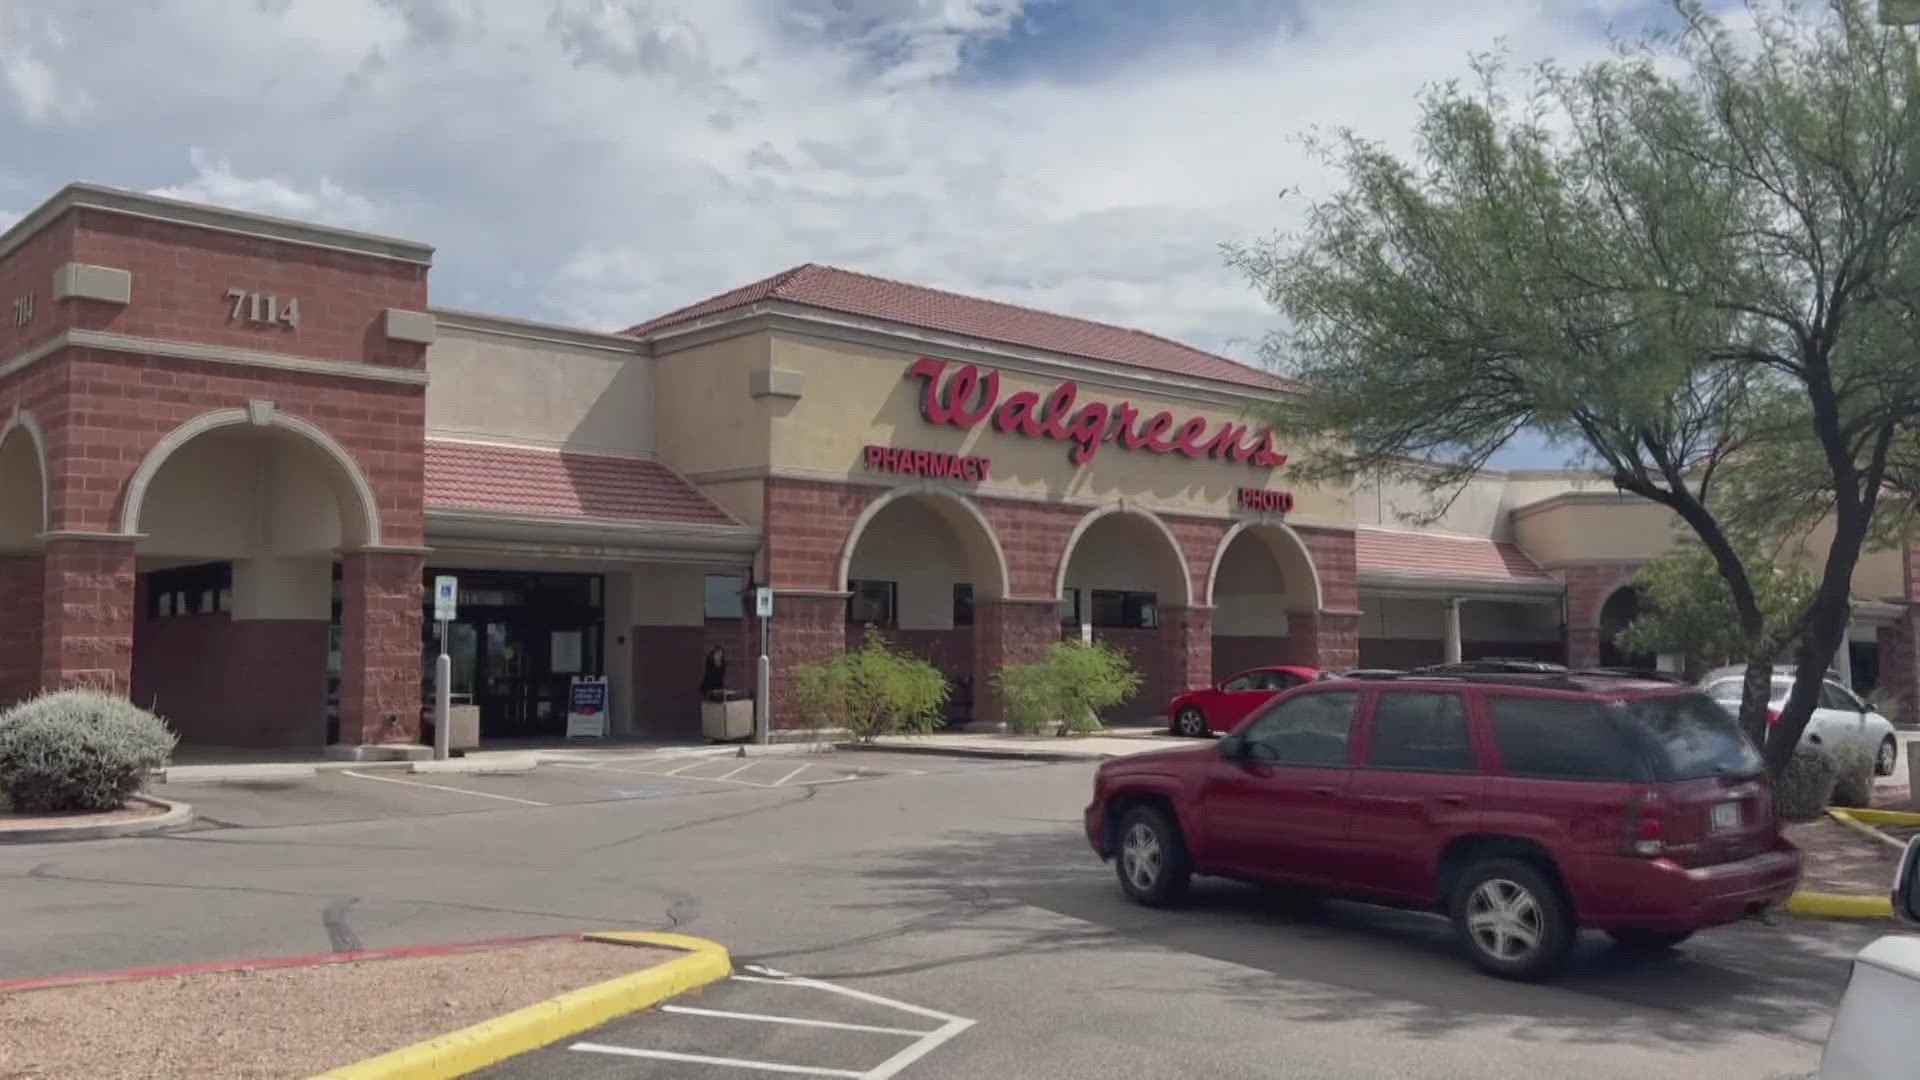 The new abortion rules in Arizona are starting to affect some patients directly. A Tucson girl was initially denied medication at a Walgreens Pharmacy.